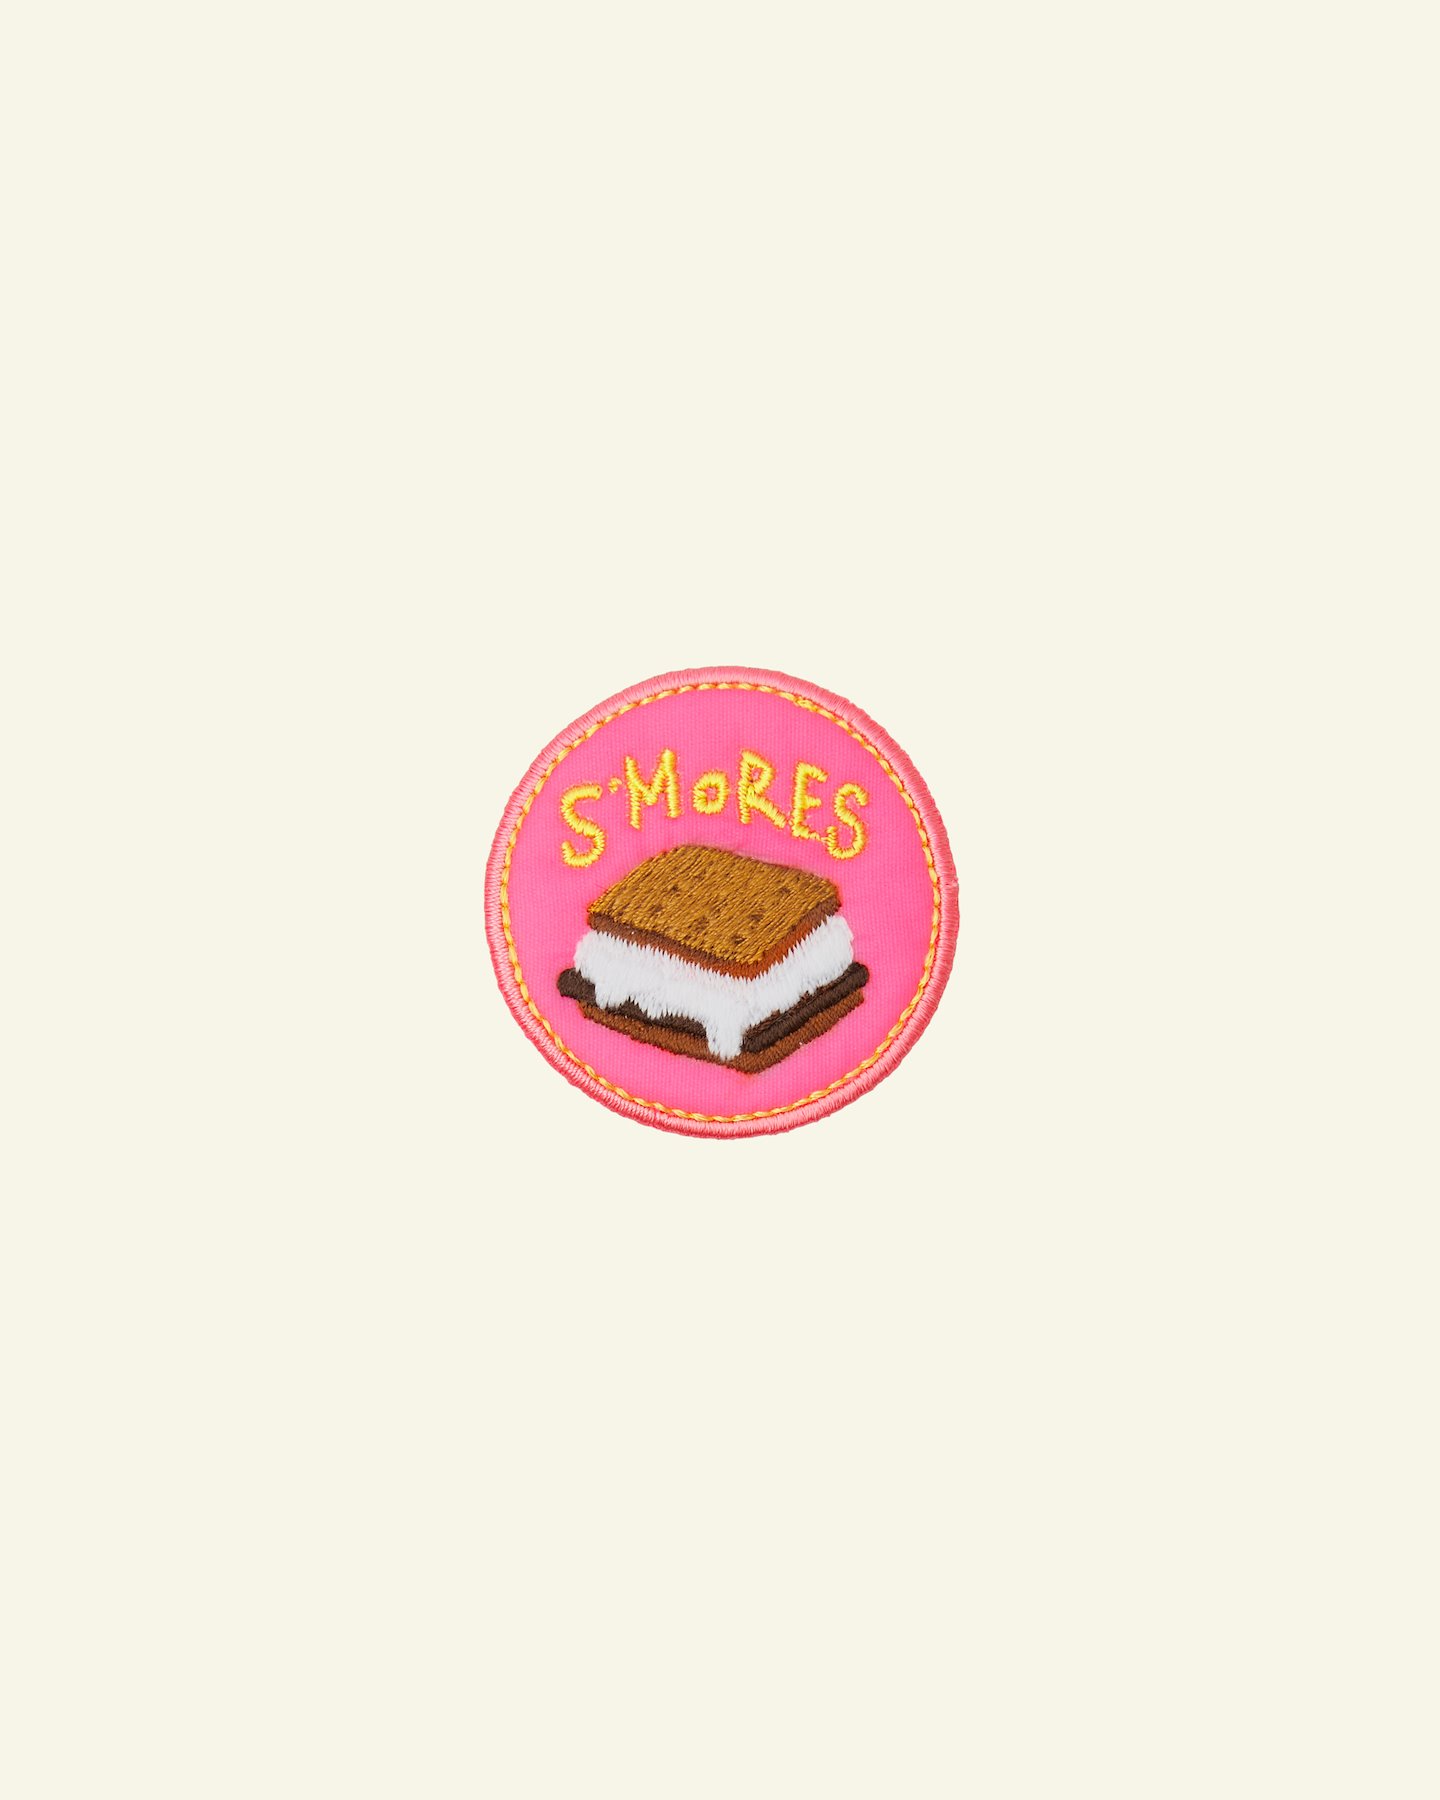 Patch smore 48mm pink 24975_pack